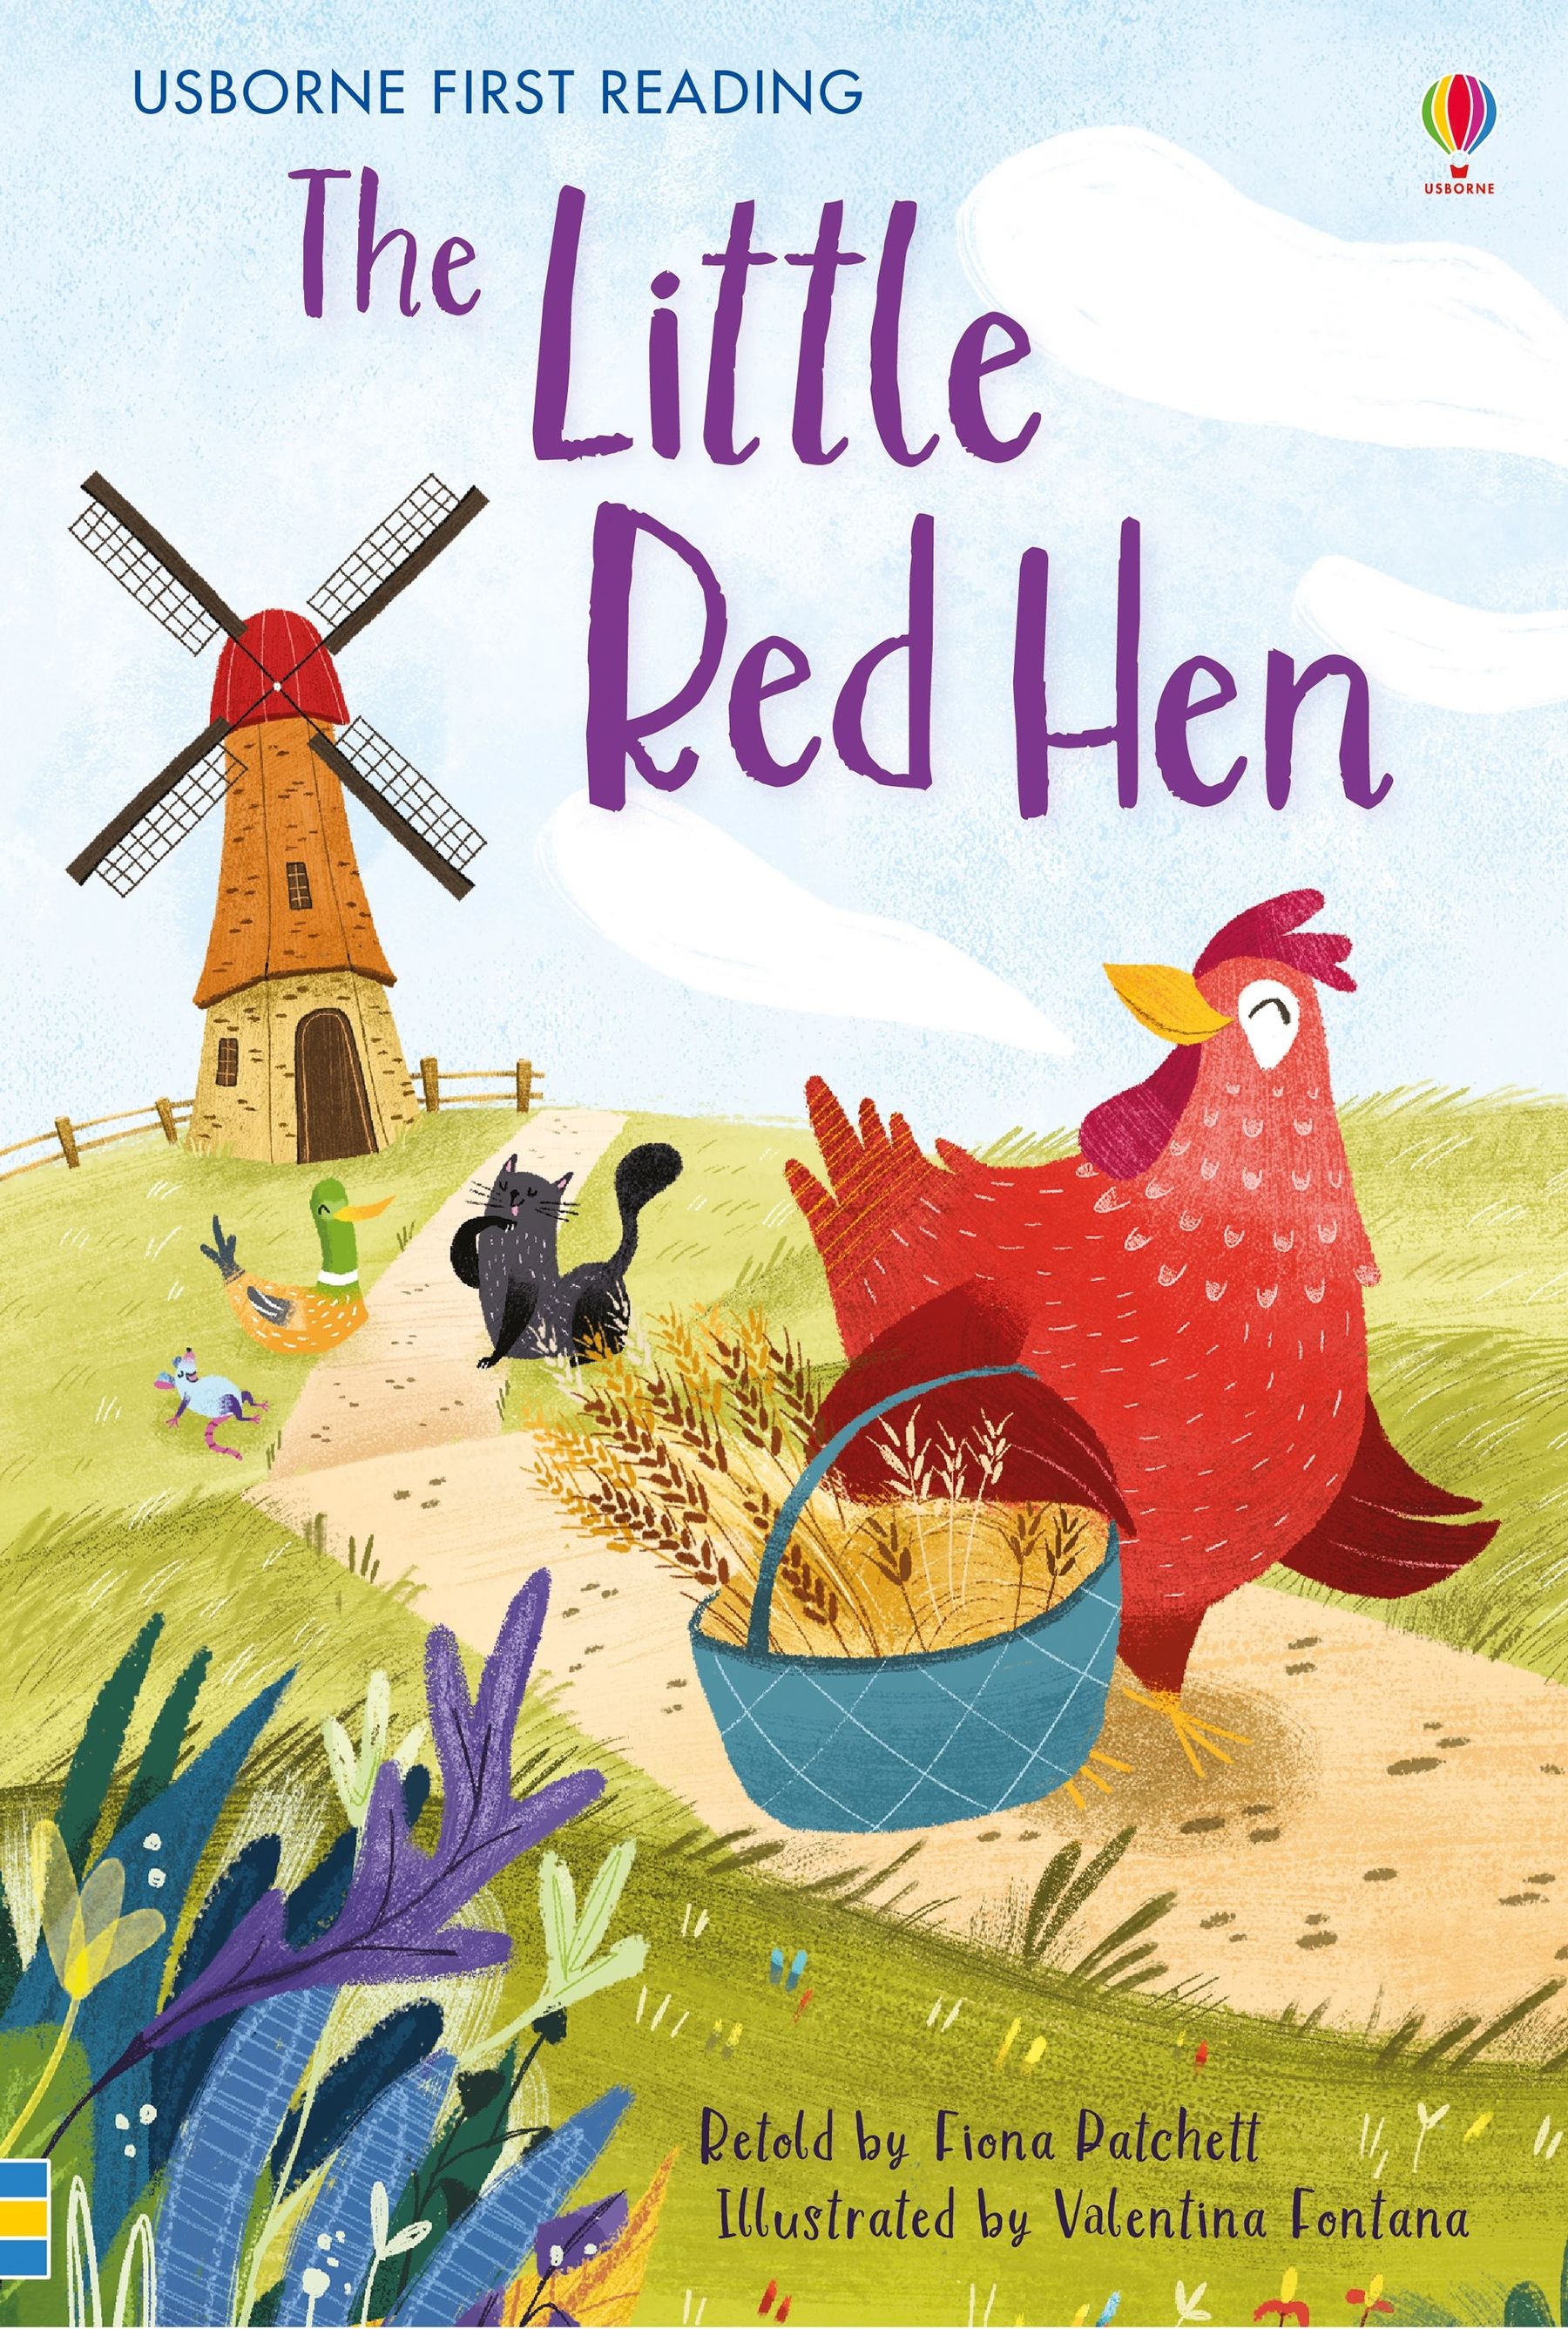 Usborne First Reading: The Little Red Hen